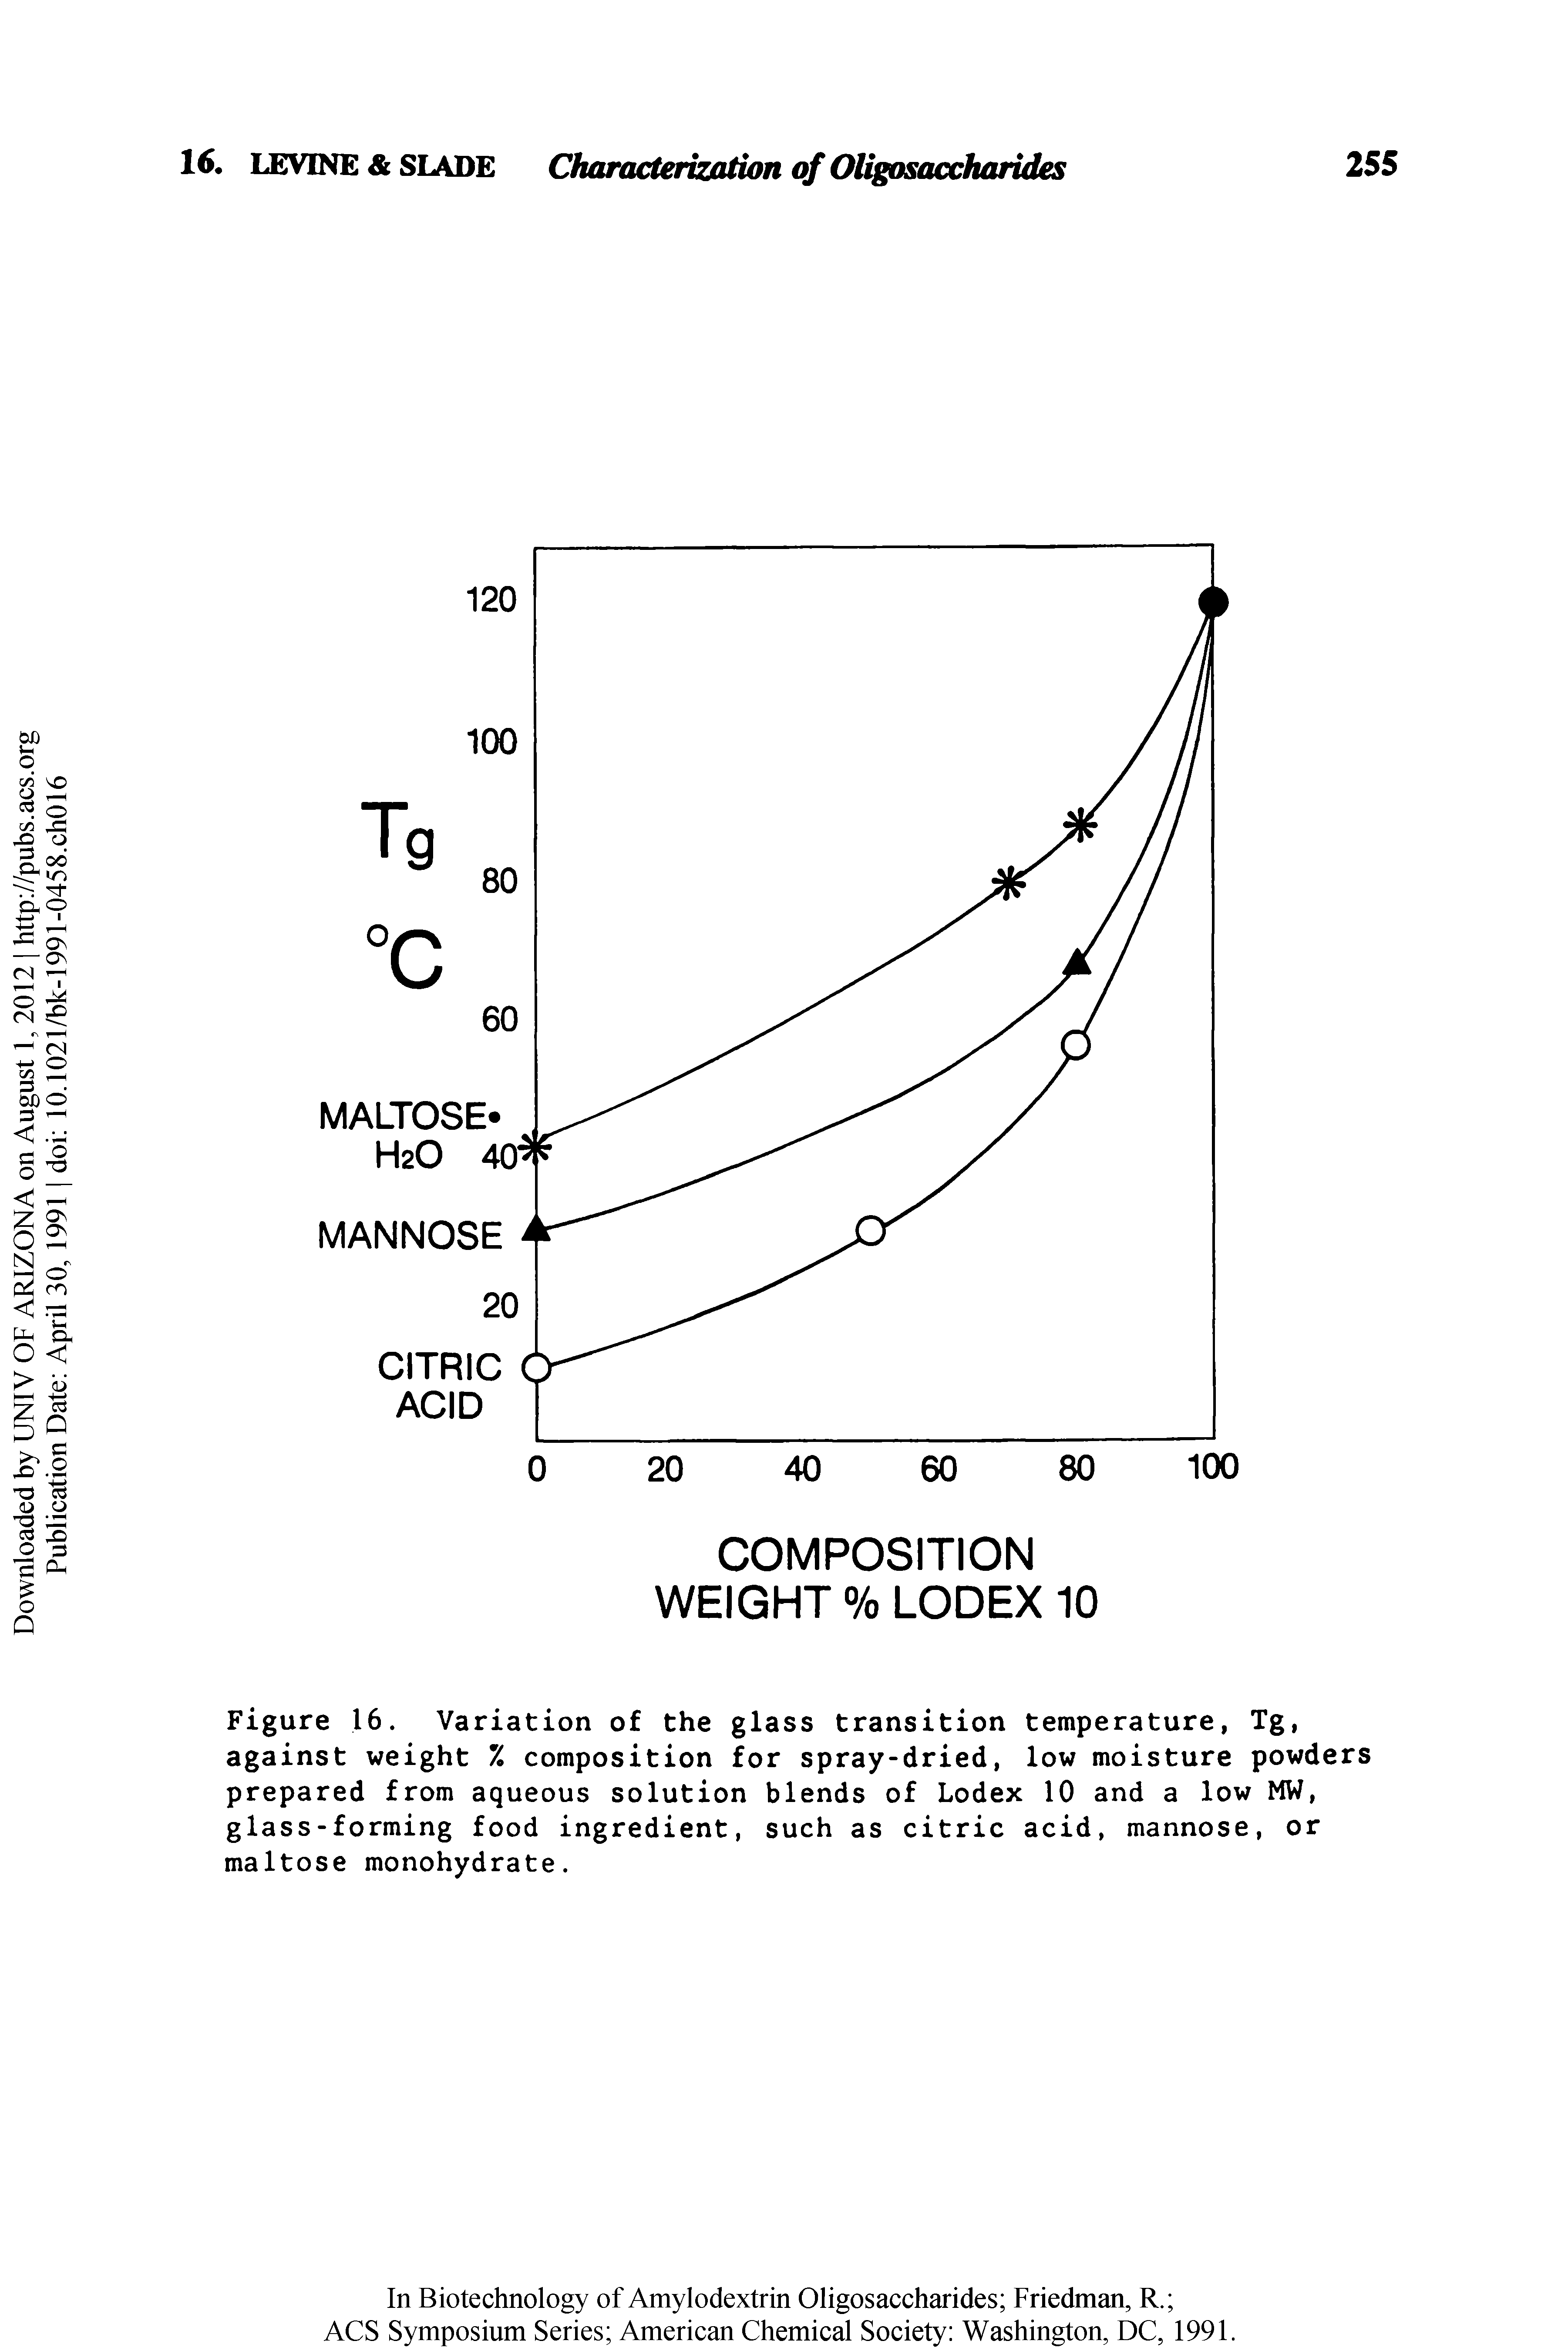 Figure 16. Variation of the glass transition temperature, Tg, against weight % composition for spray-dried, low moisture powders prepared from aqueous solution blends of Lodex 10 and a low MW, glass-forming food ingredient, such as citric acid, mannose, or maltose monohydrate.